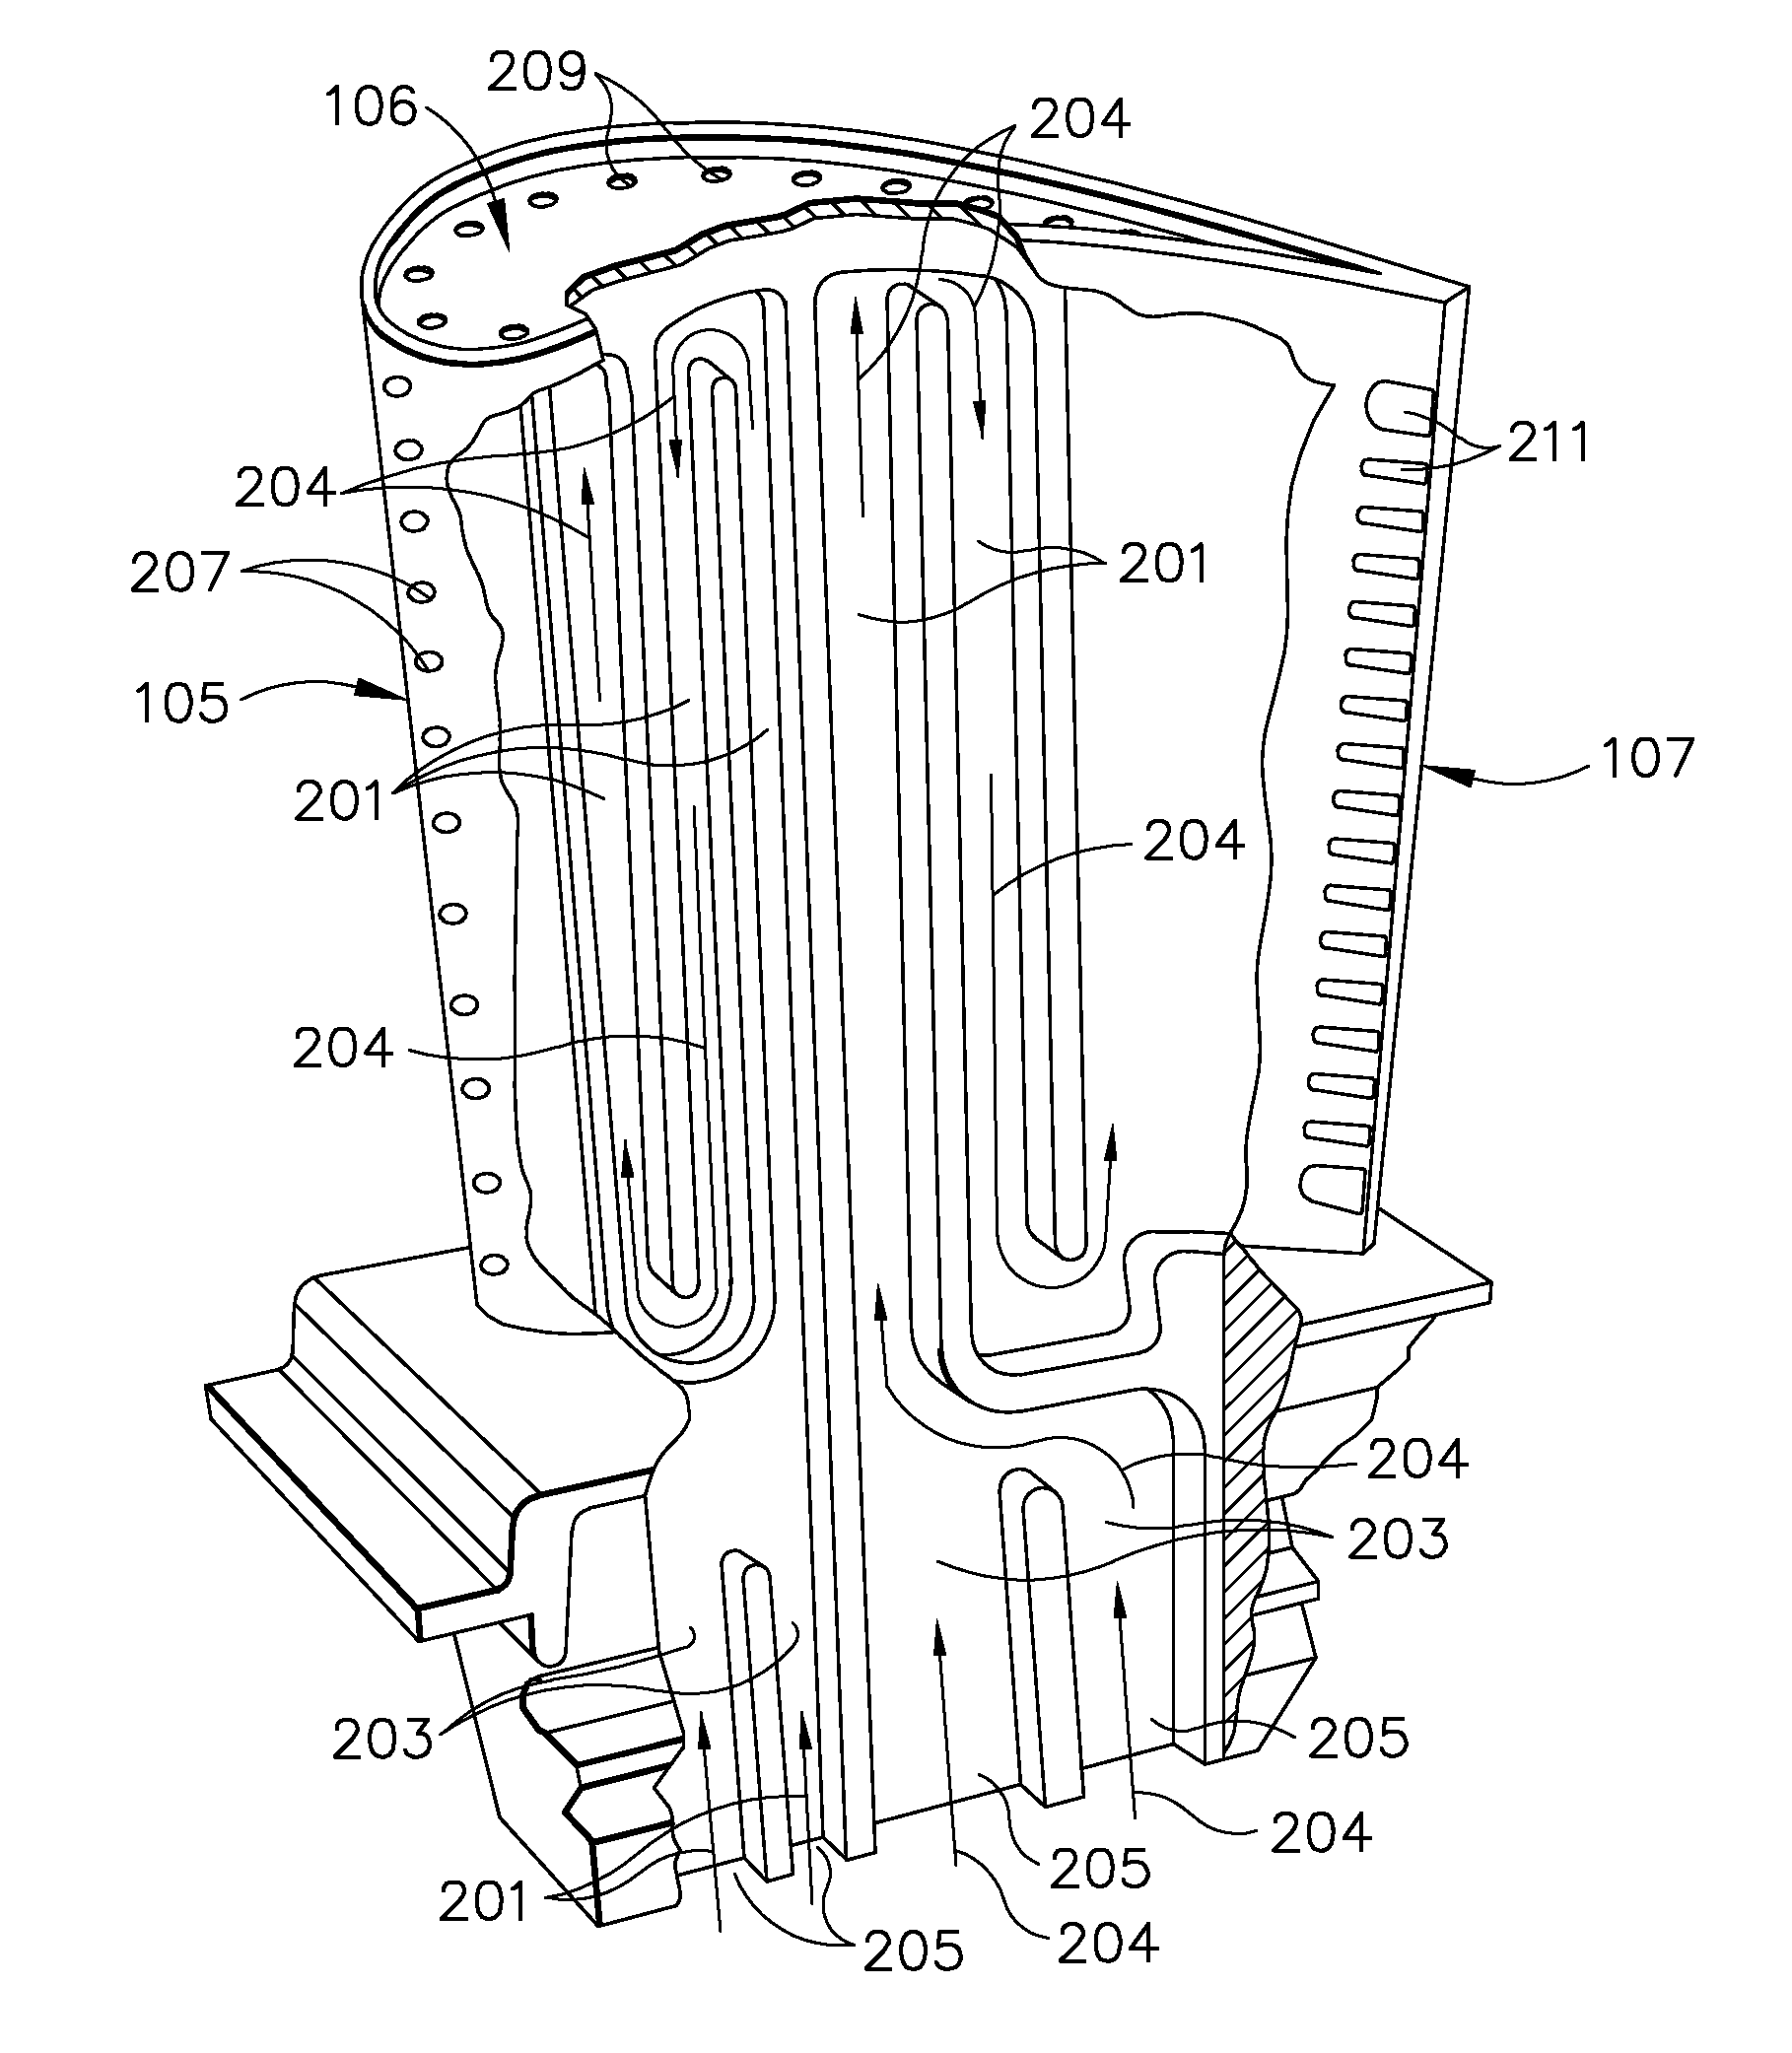 Cooled airfoil and method for making an airfoil having reduced trail edge slot flow